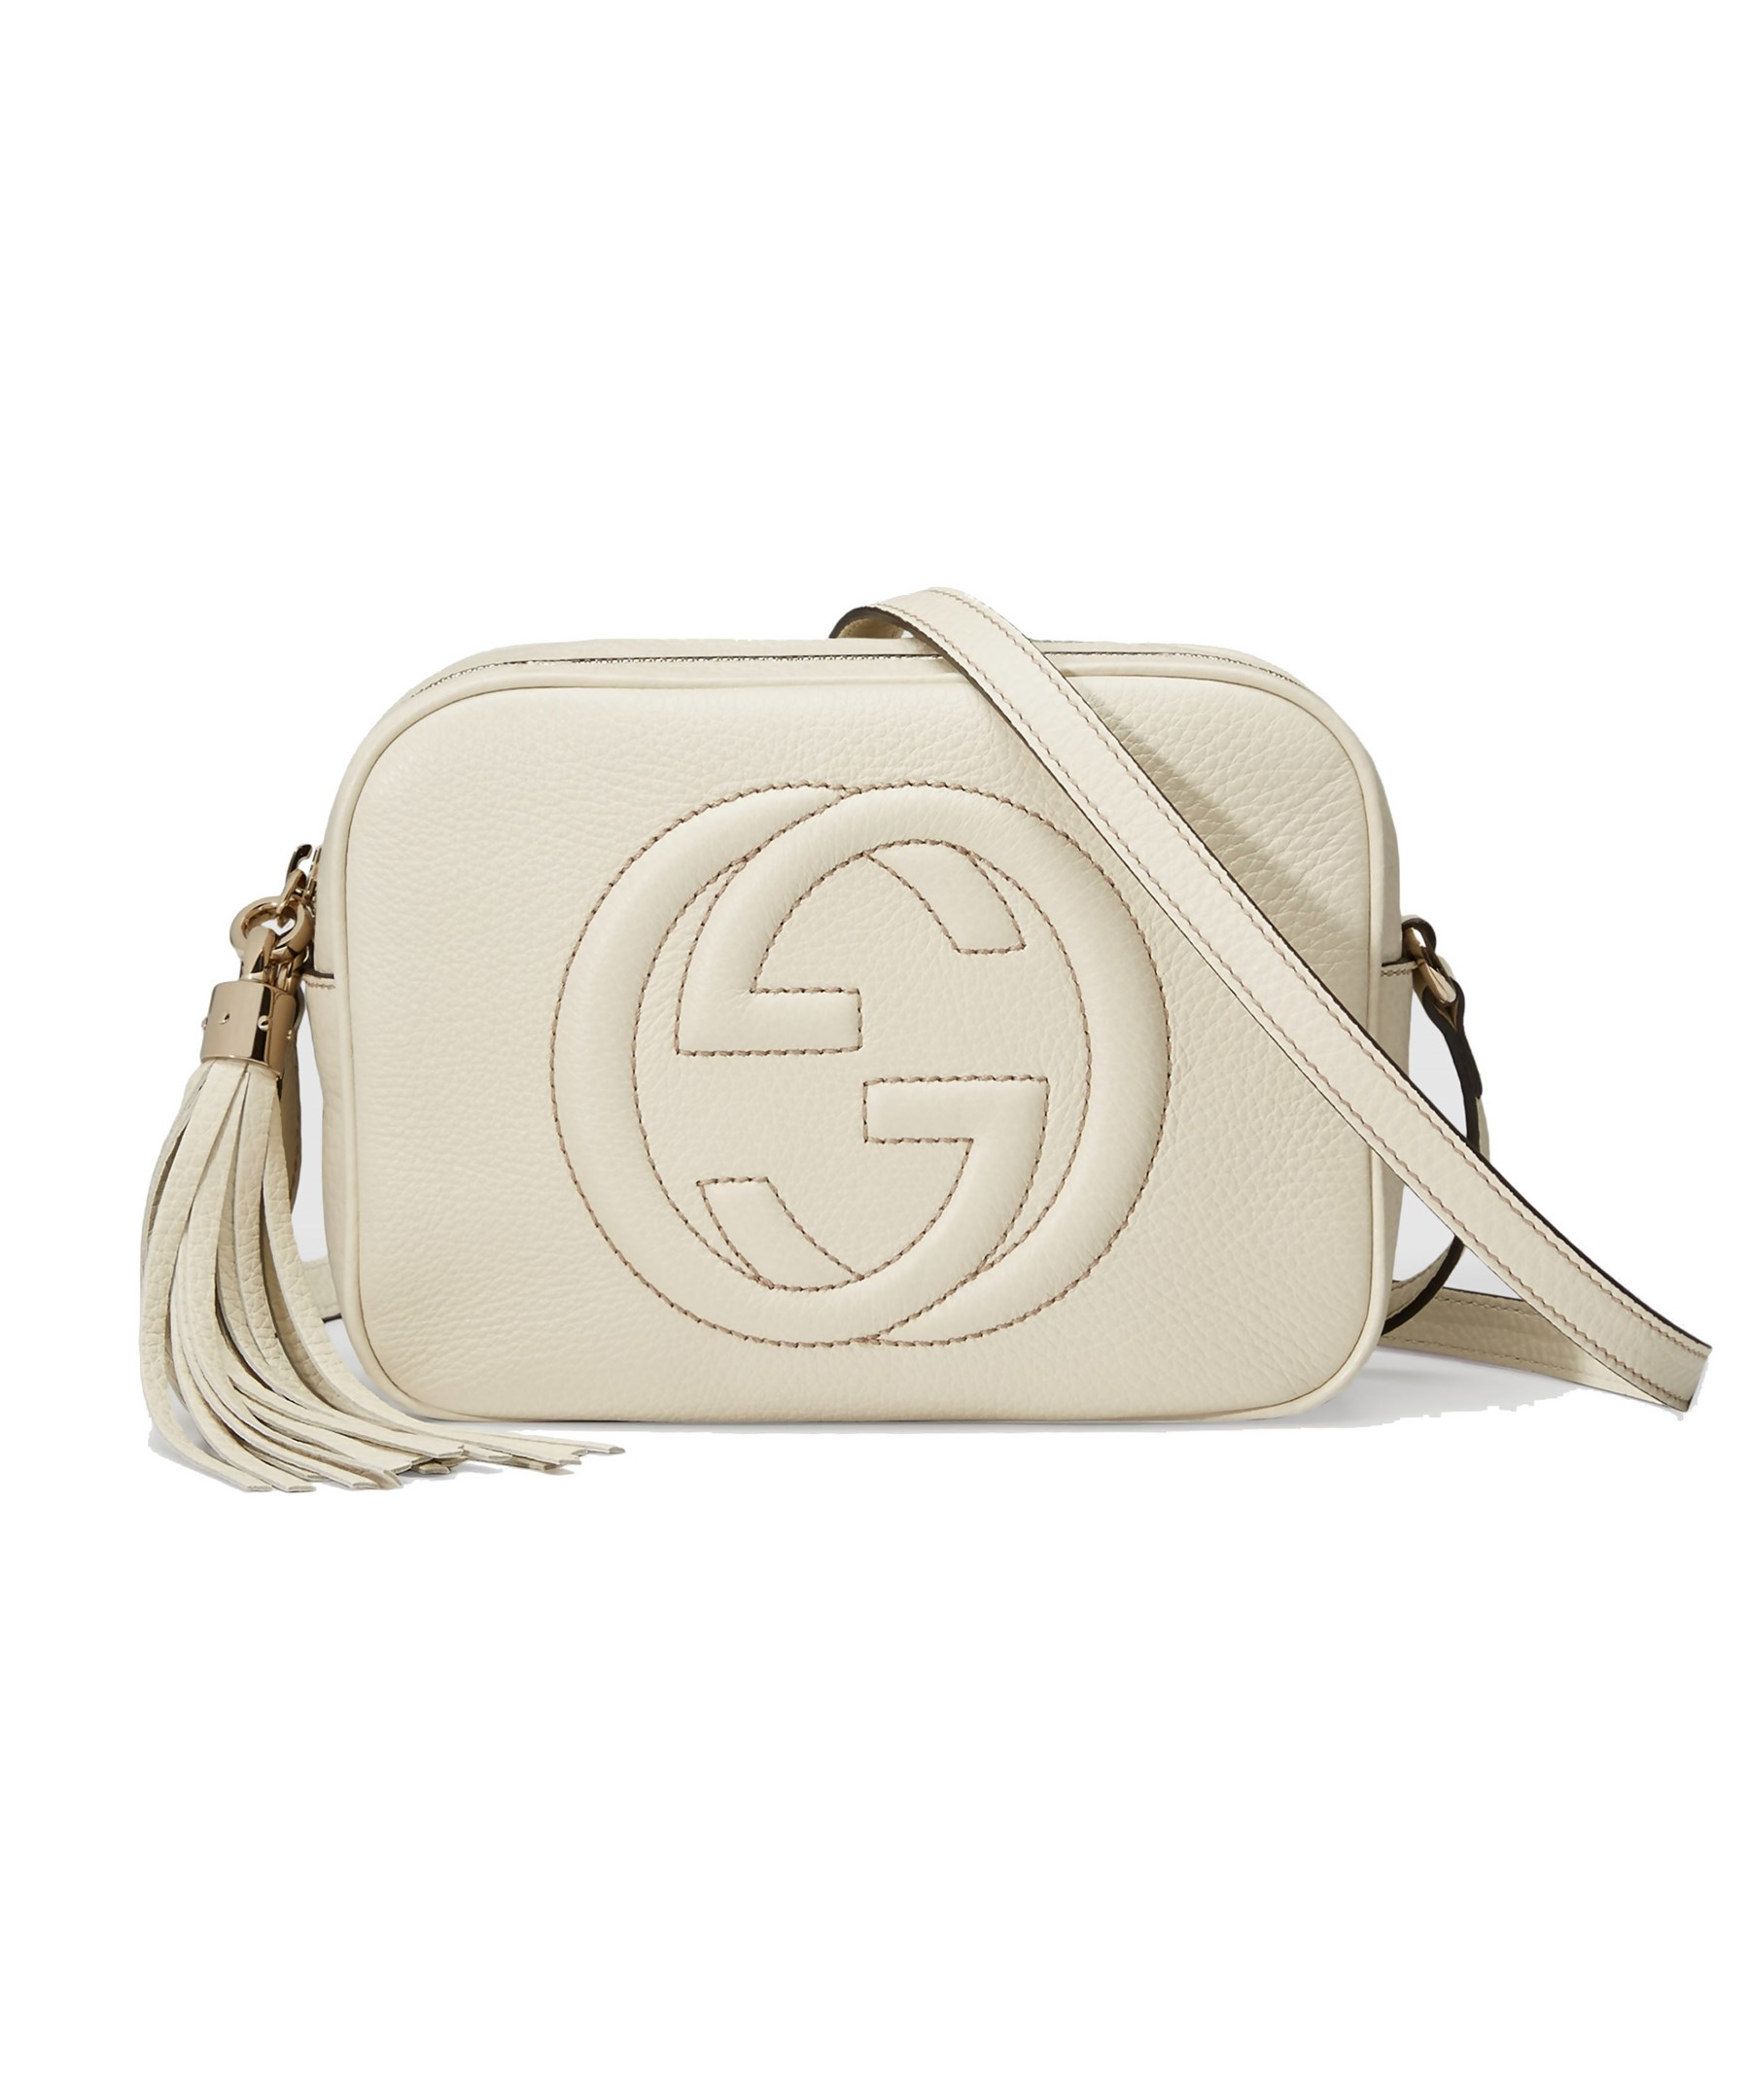 Gucci Soho Leather Disco Bag in White | Lyst